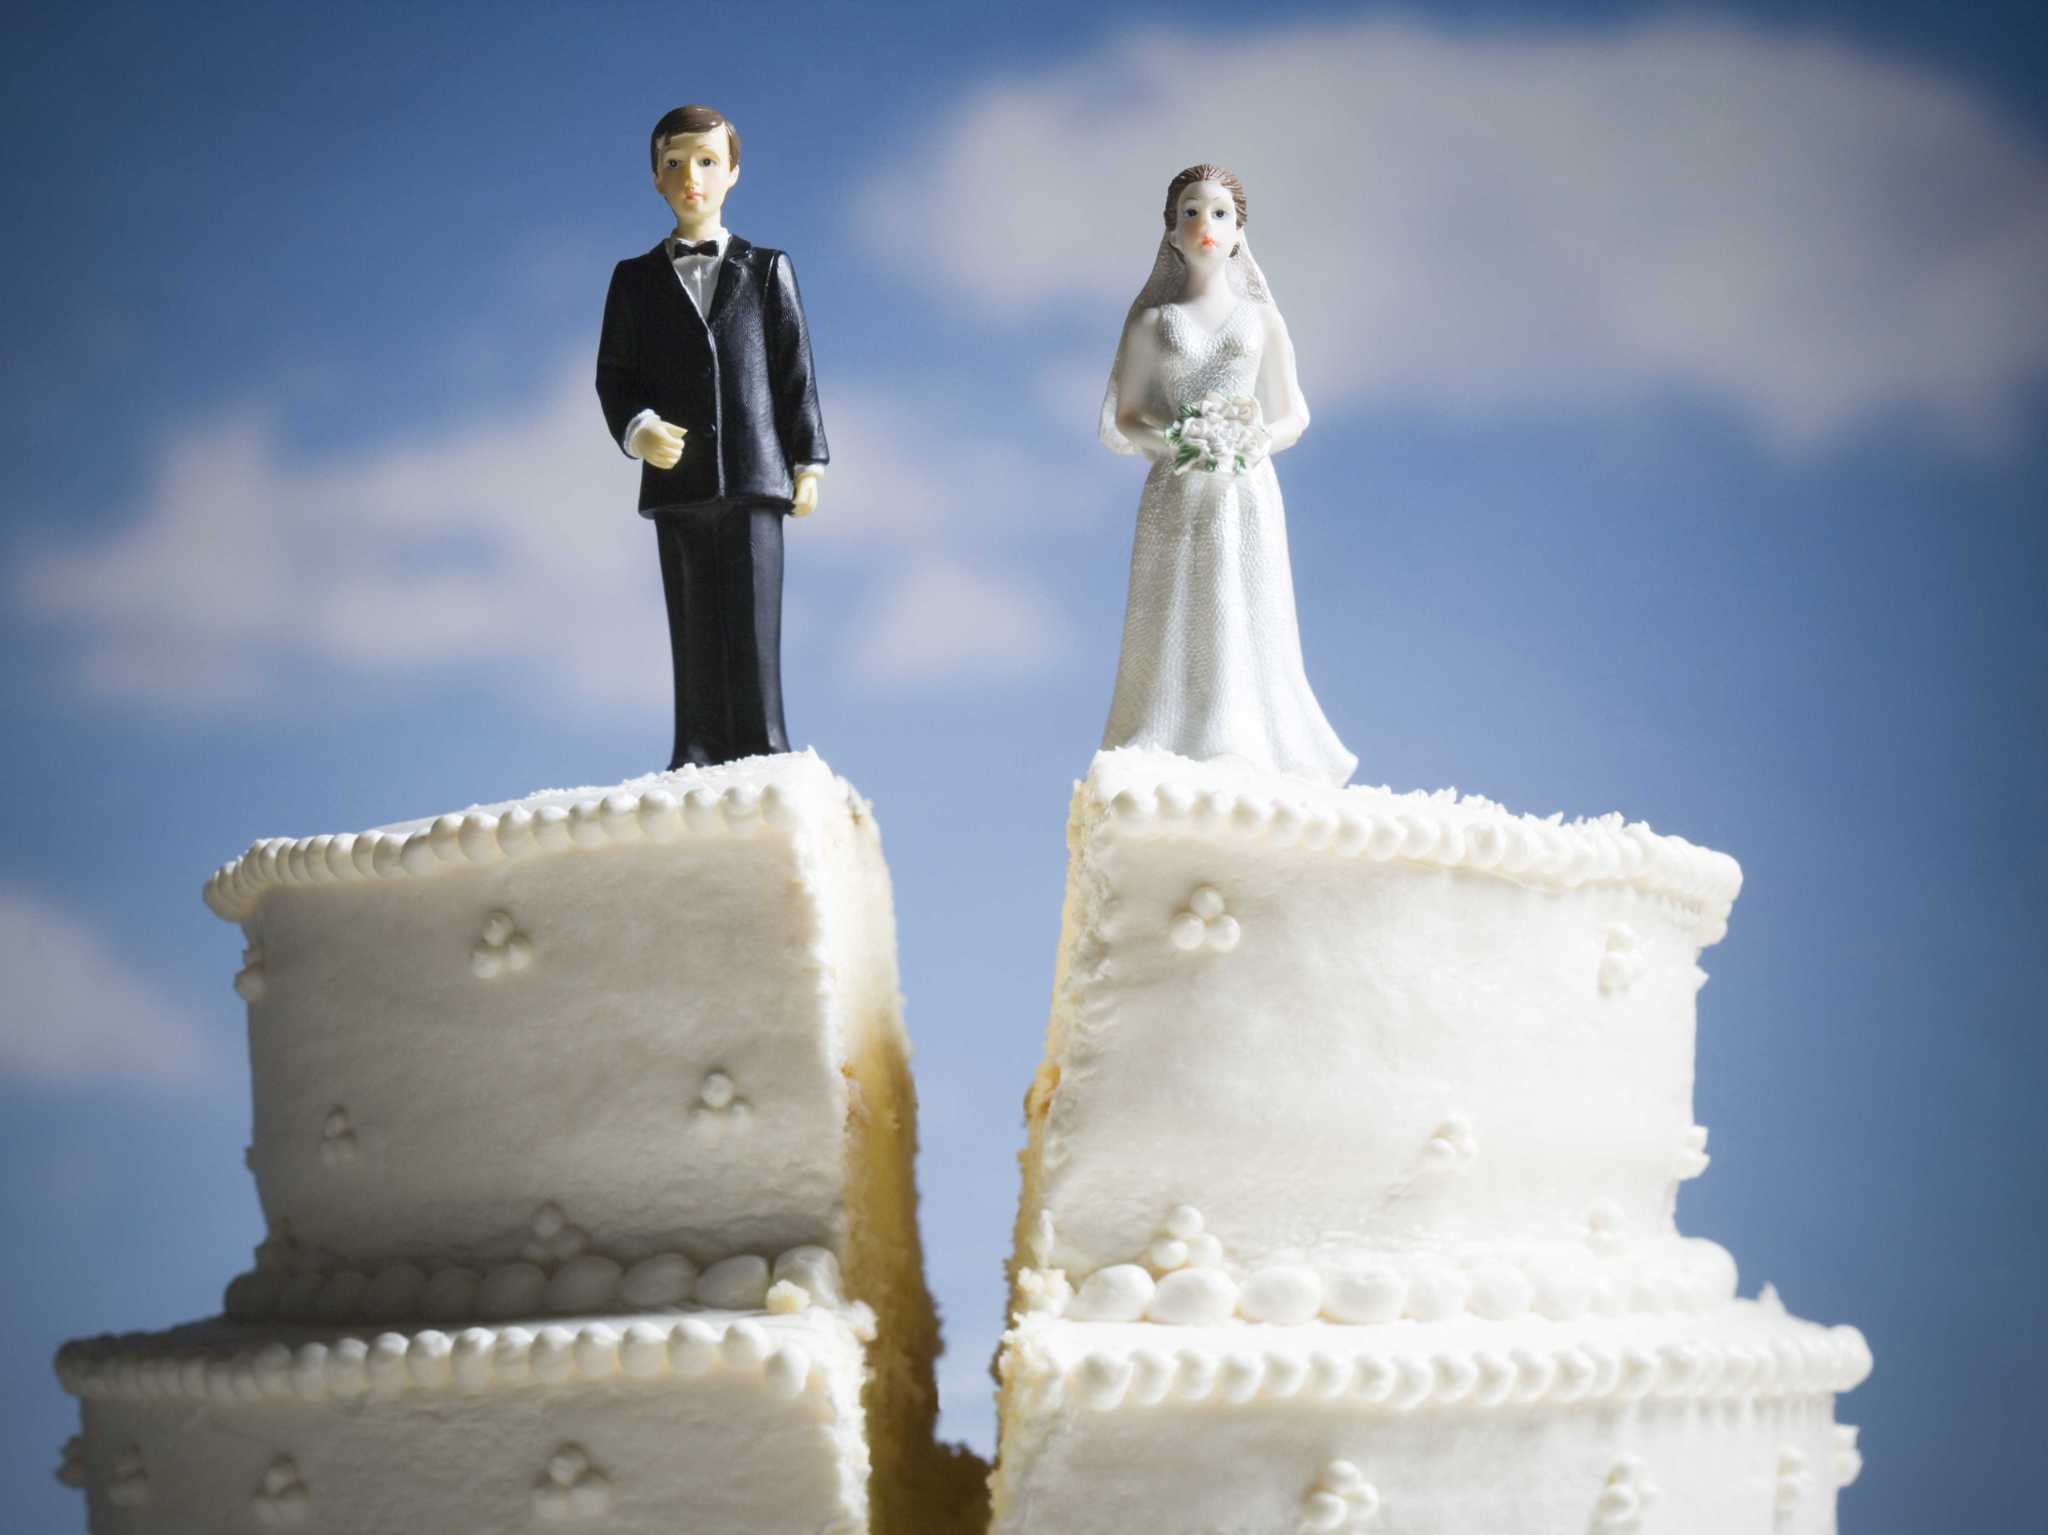 12 Signs You May Be Headed For Divorce According To Experts